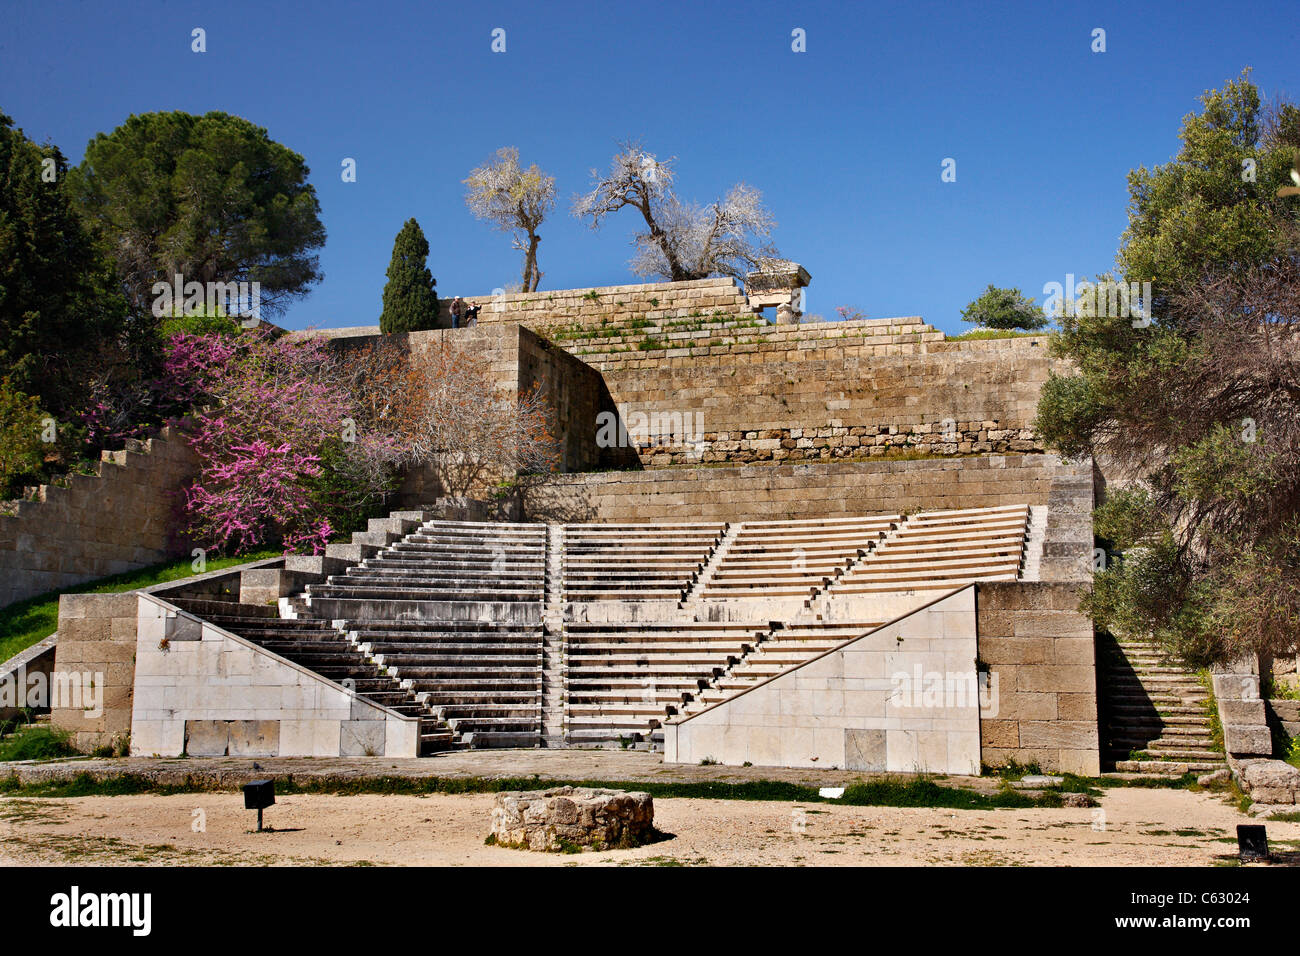 The restored marble theater at the hill of Monte Smith, site of the Acropolis of ancient Rhodes, Dodecanese, Greece. Stock Photo